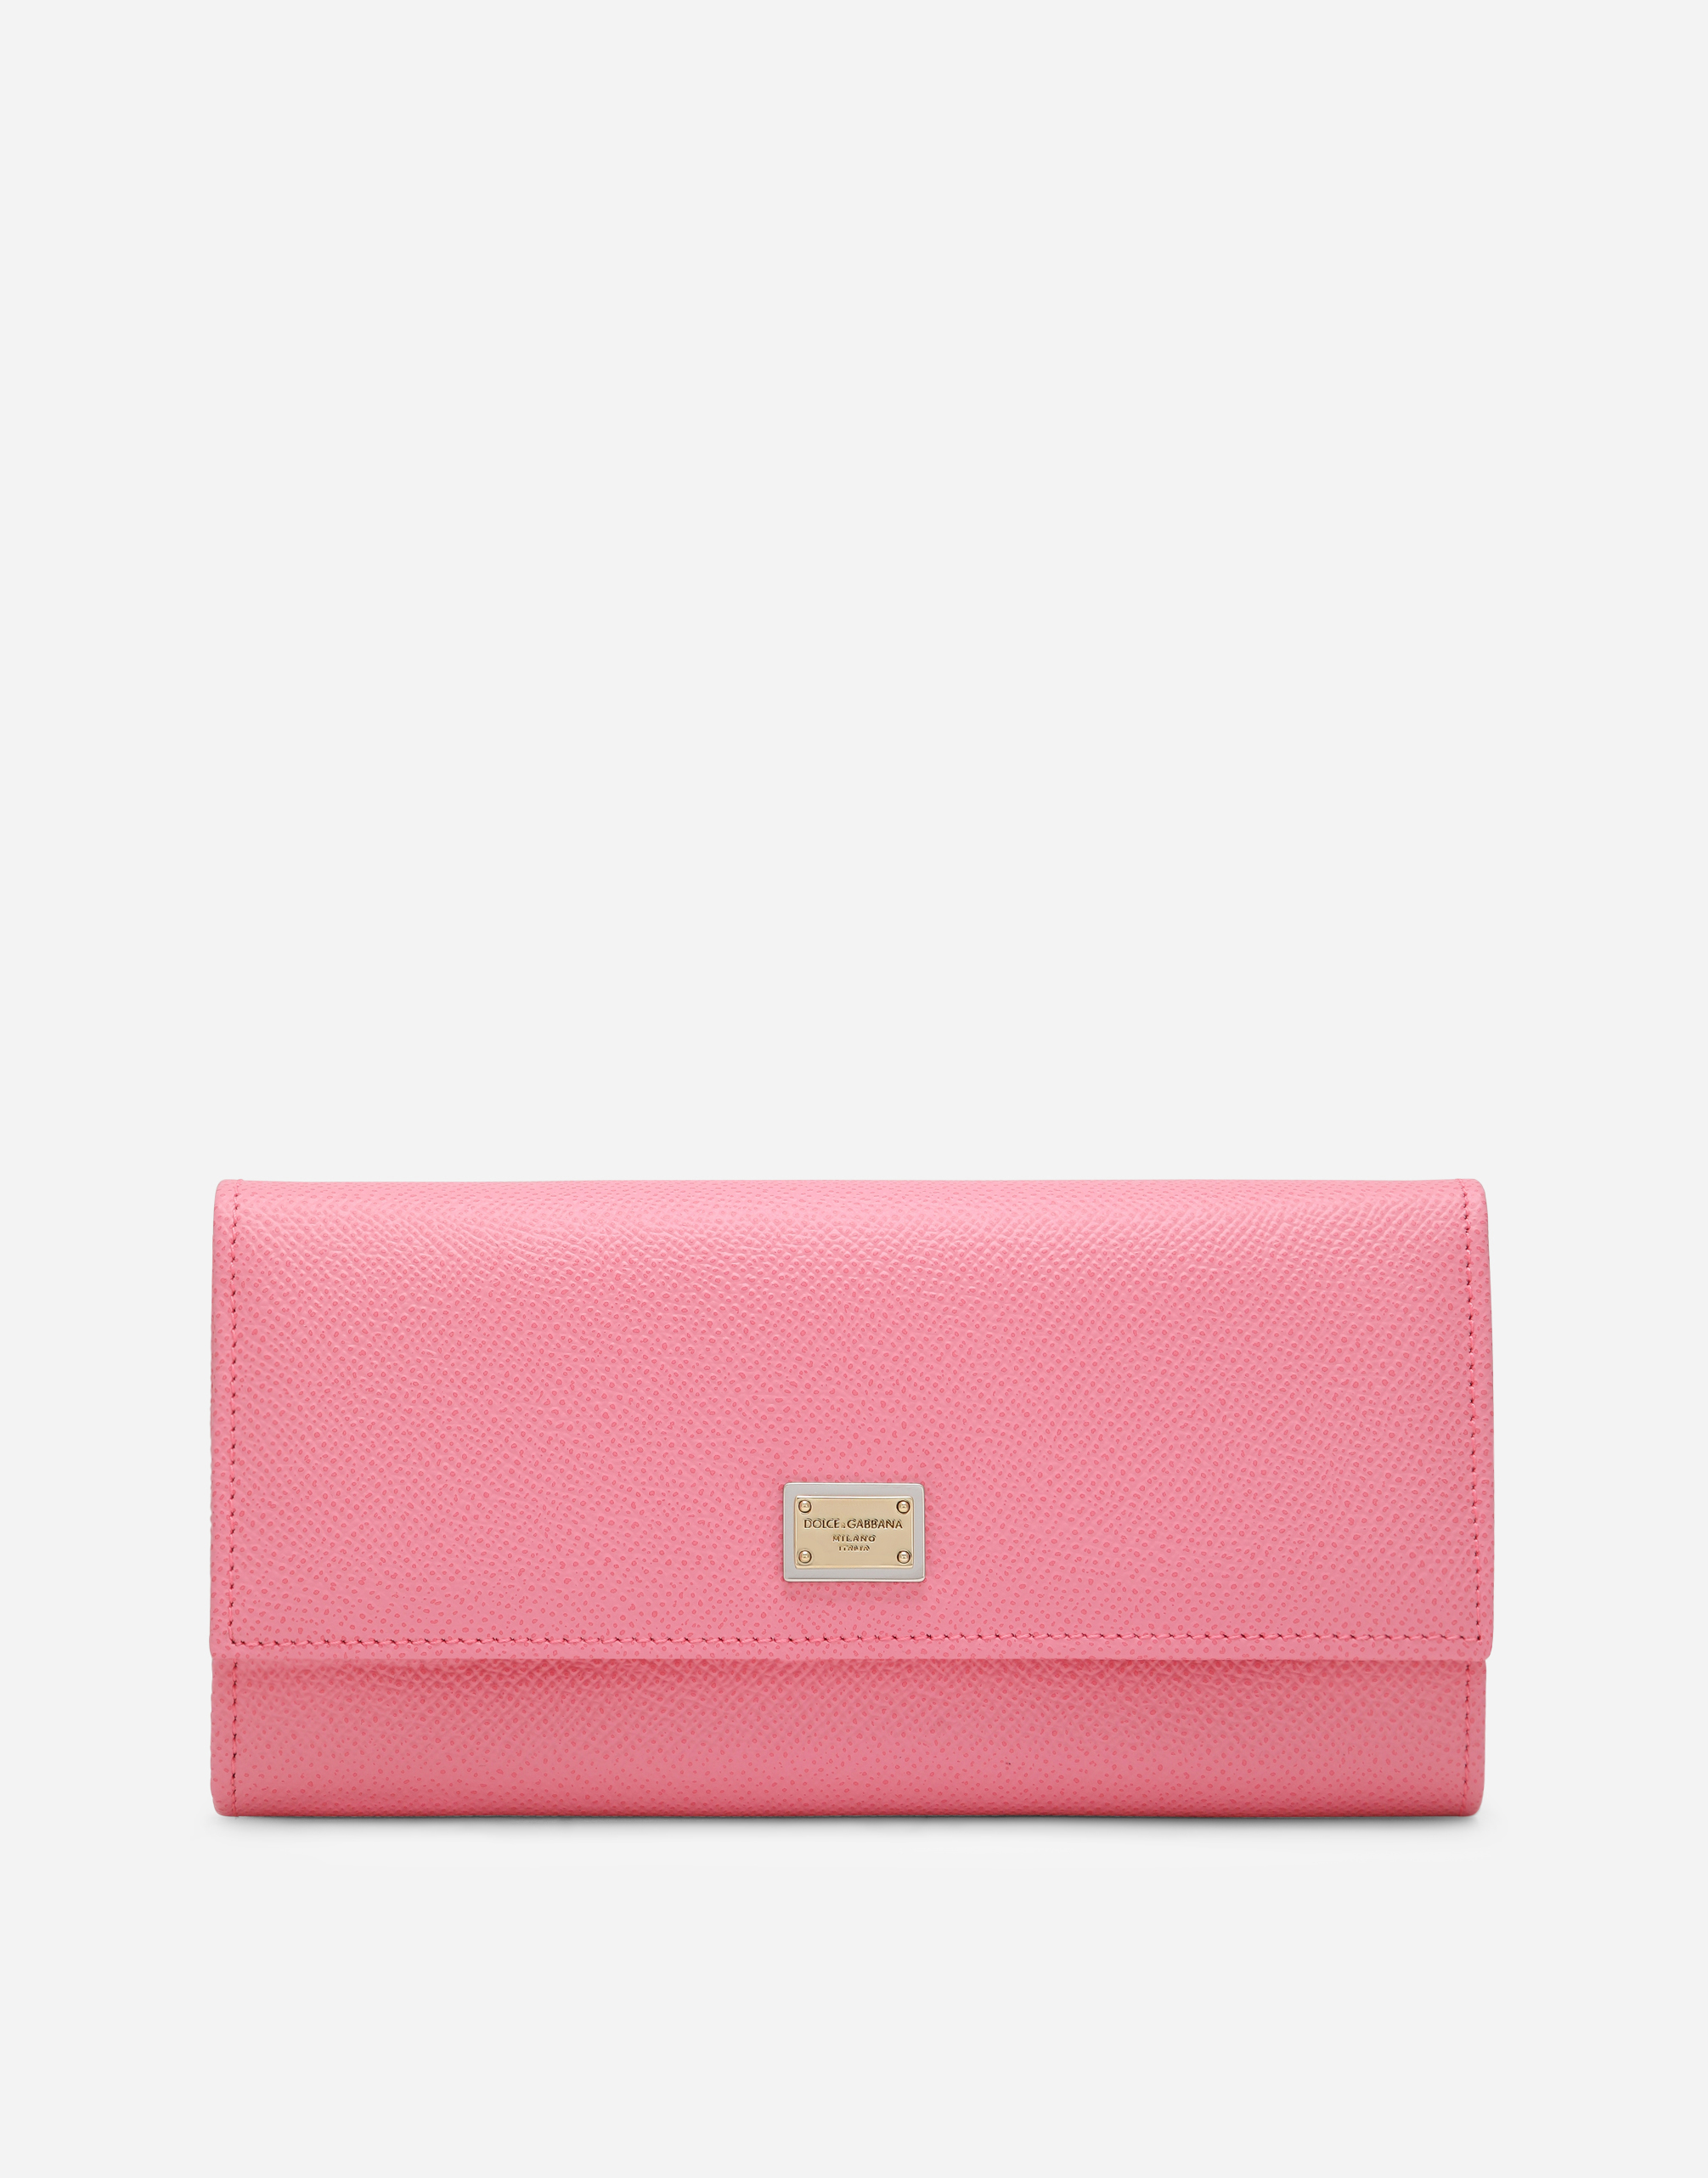 Dolce & Gabbana Dauphine Calfskin Wallet With Branded Tag In Pink